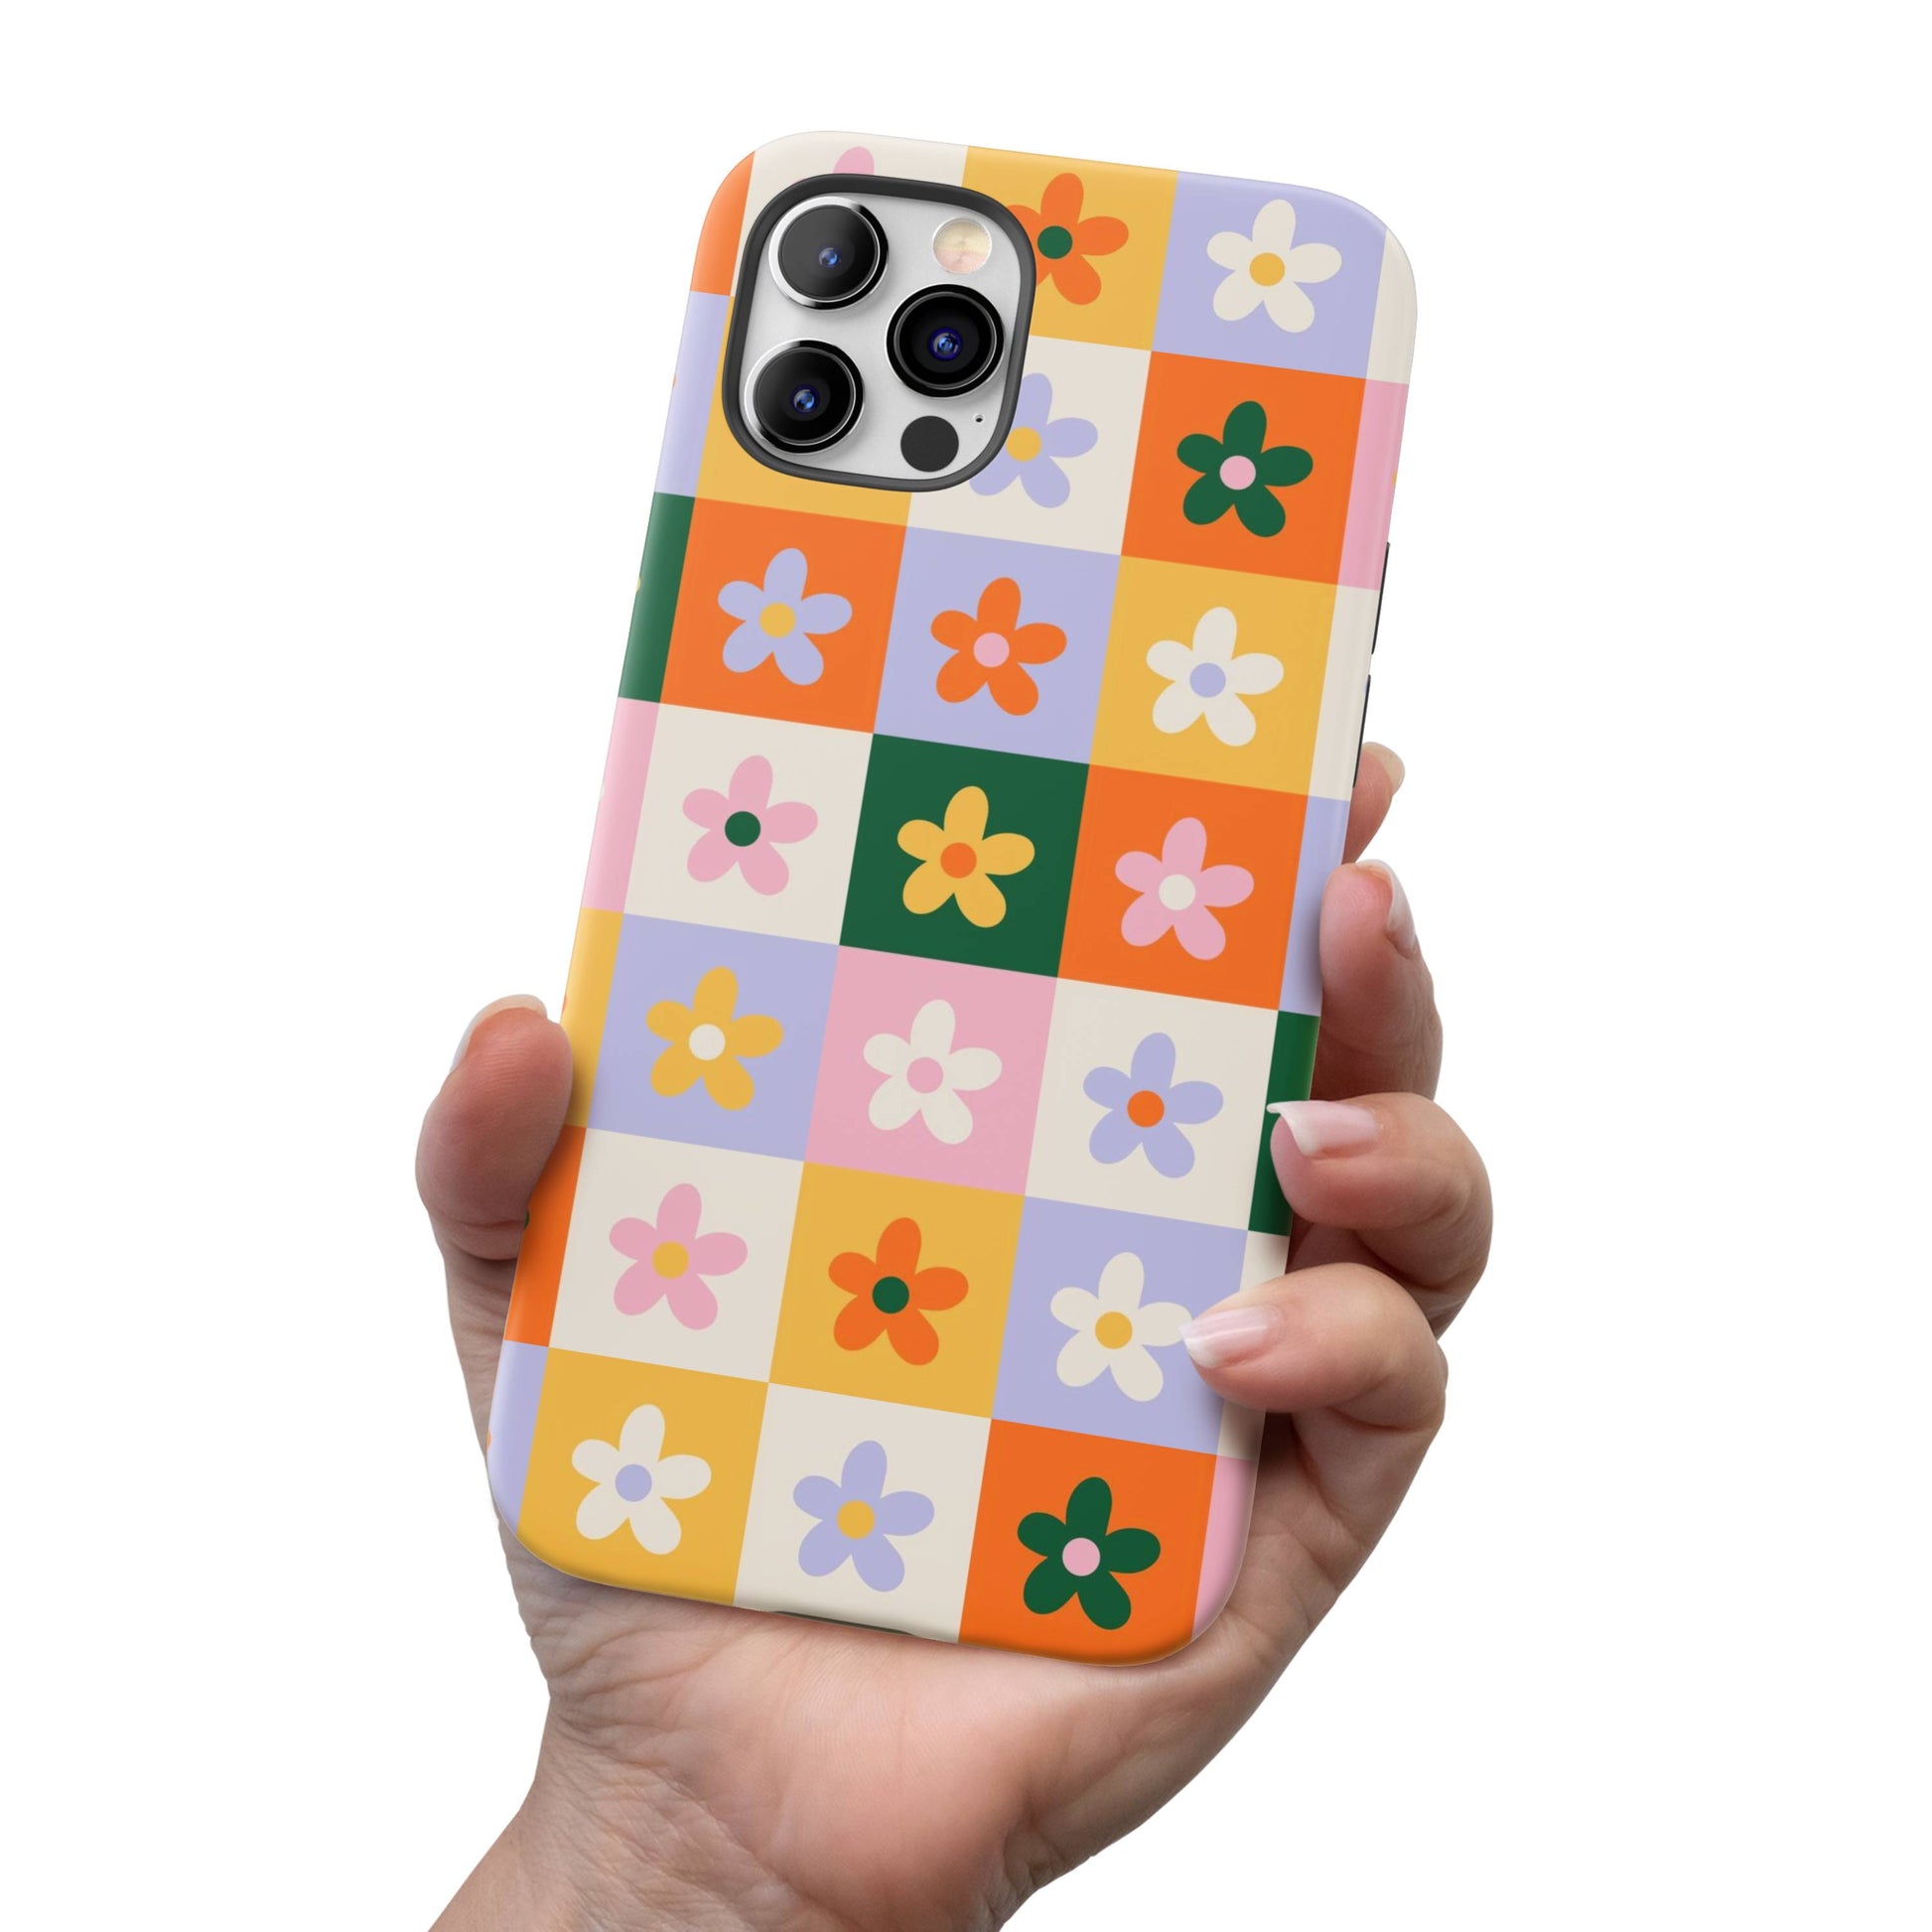 Patchwork Flowers iPhone Case